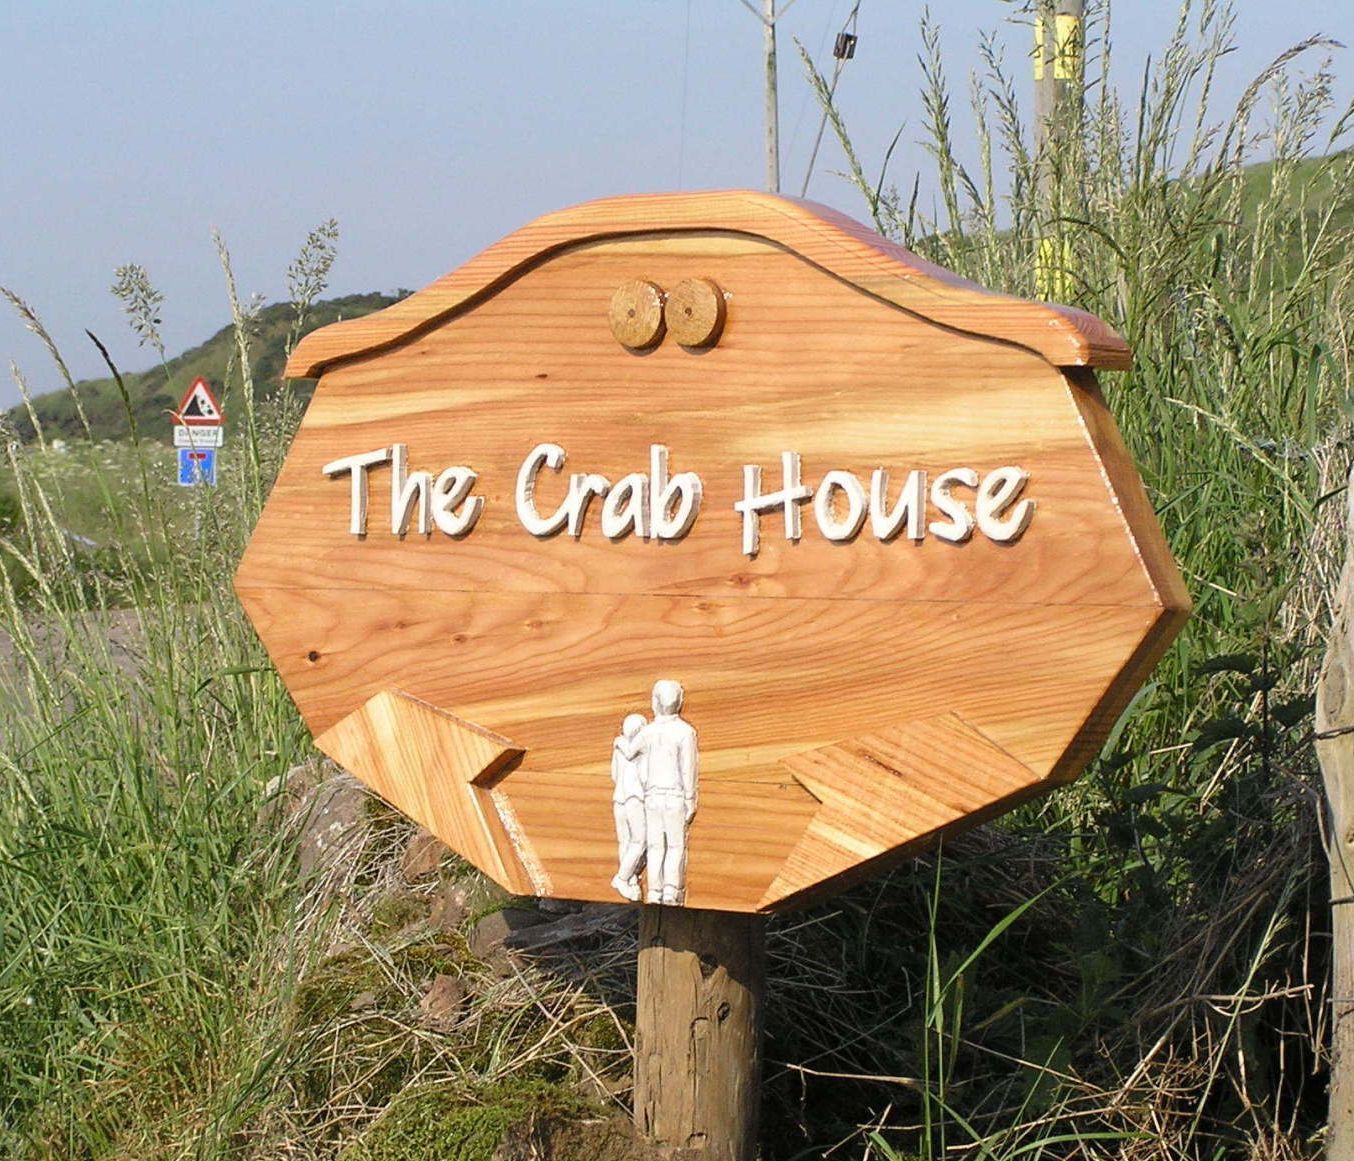 Highly personalised wooden house sign by Ingrained Culture.